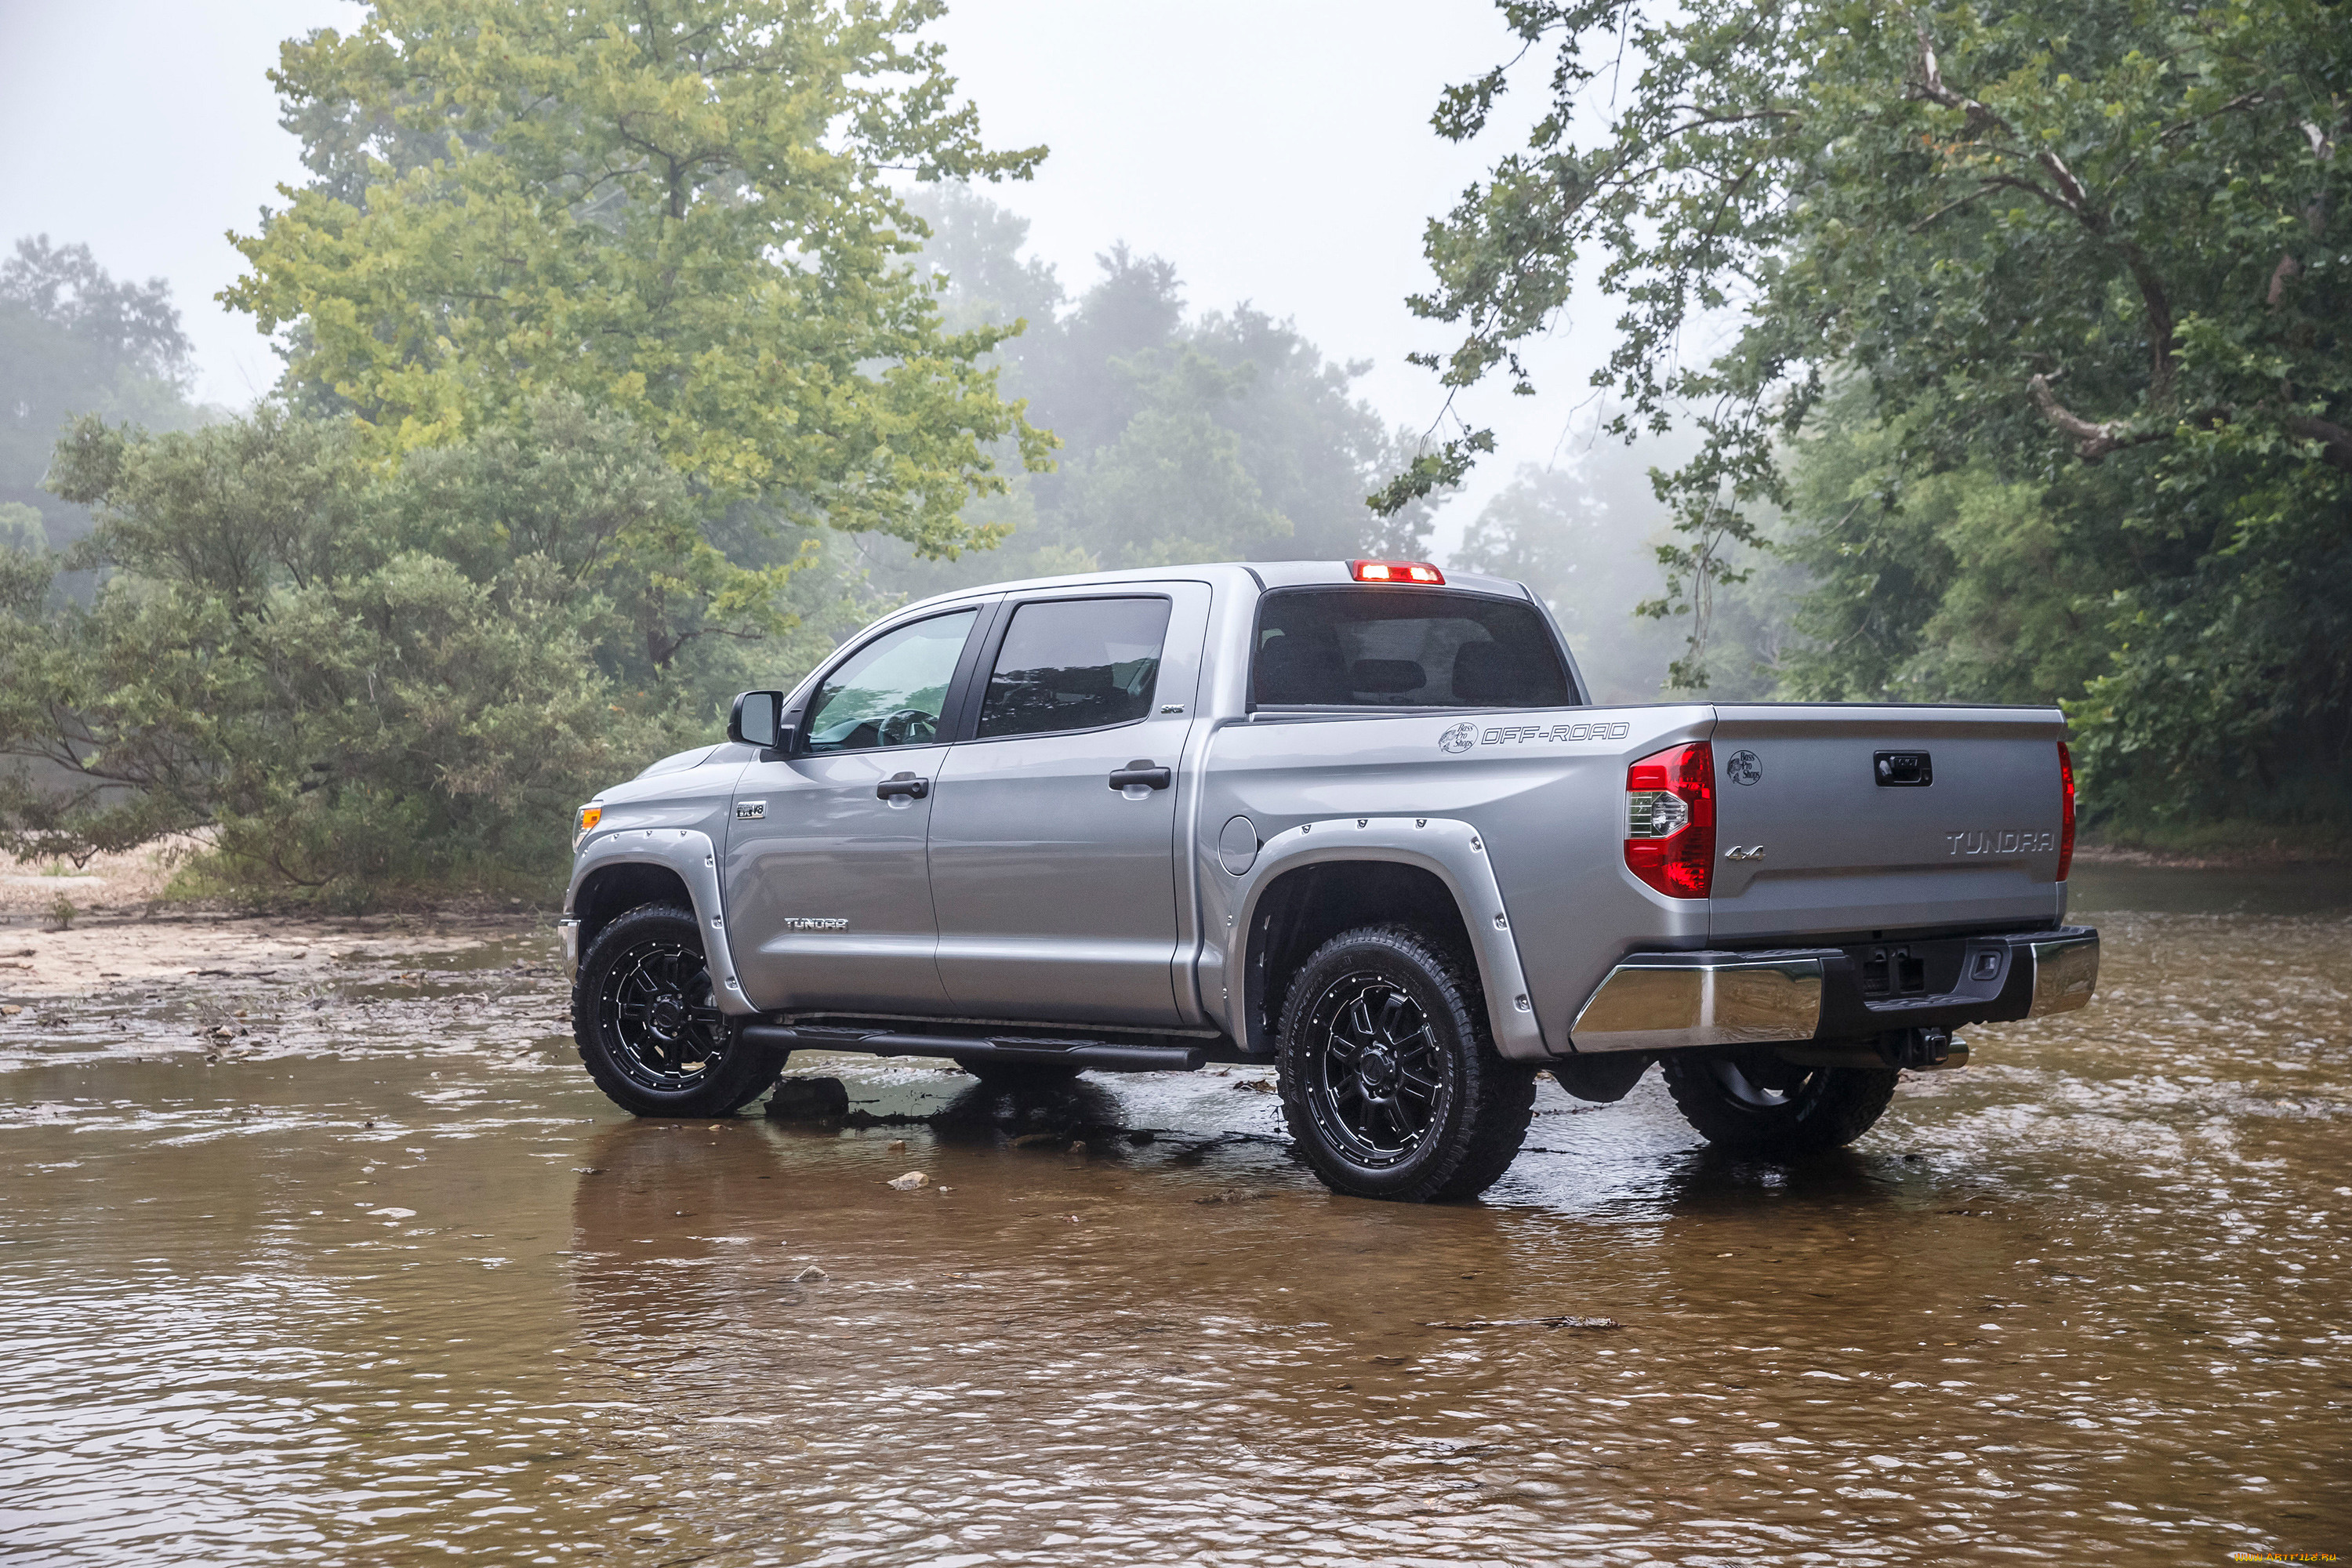 , toyota, , edition, off-road, shops, pro, bass, tundra, 2014